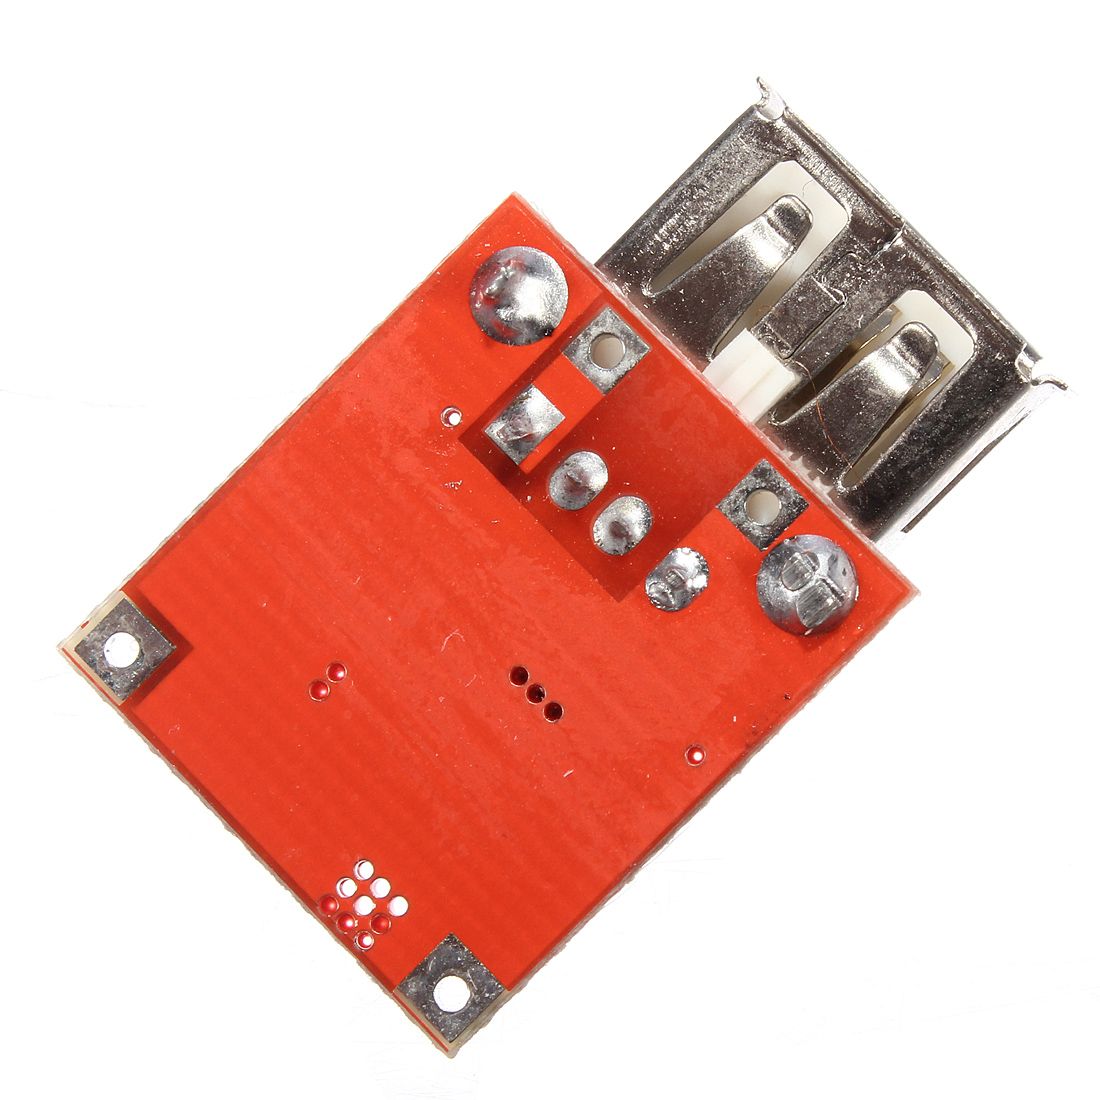 3Pcs-3V-To-5V-1A-USB-Charger-DC-DC-Converter-Step-Up-Boost-Module-For-Phone-MP3-MP4-946013